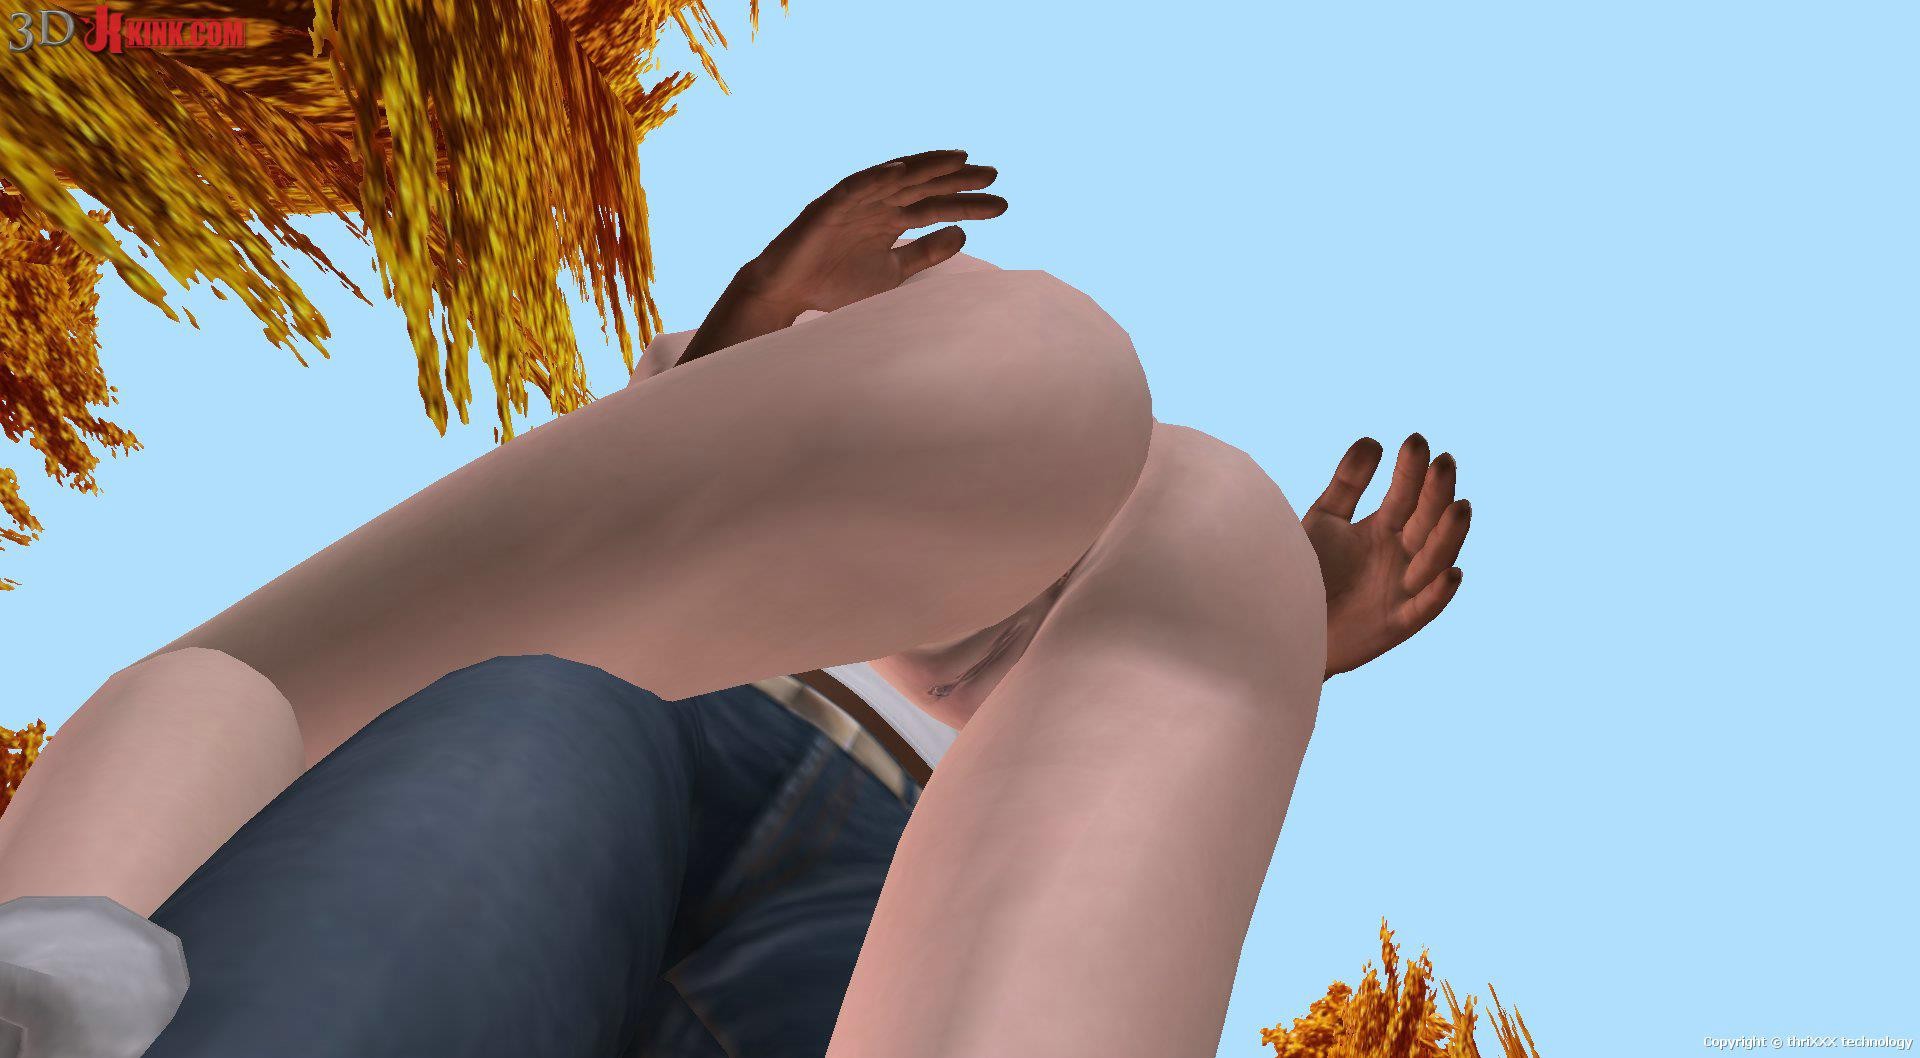 Interracial outdoor sex created in interactive 3D game #69357462